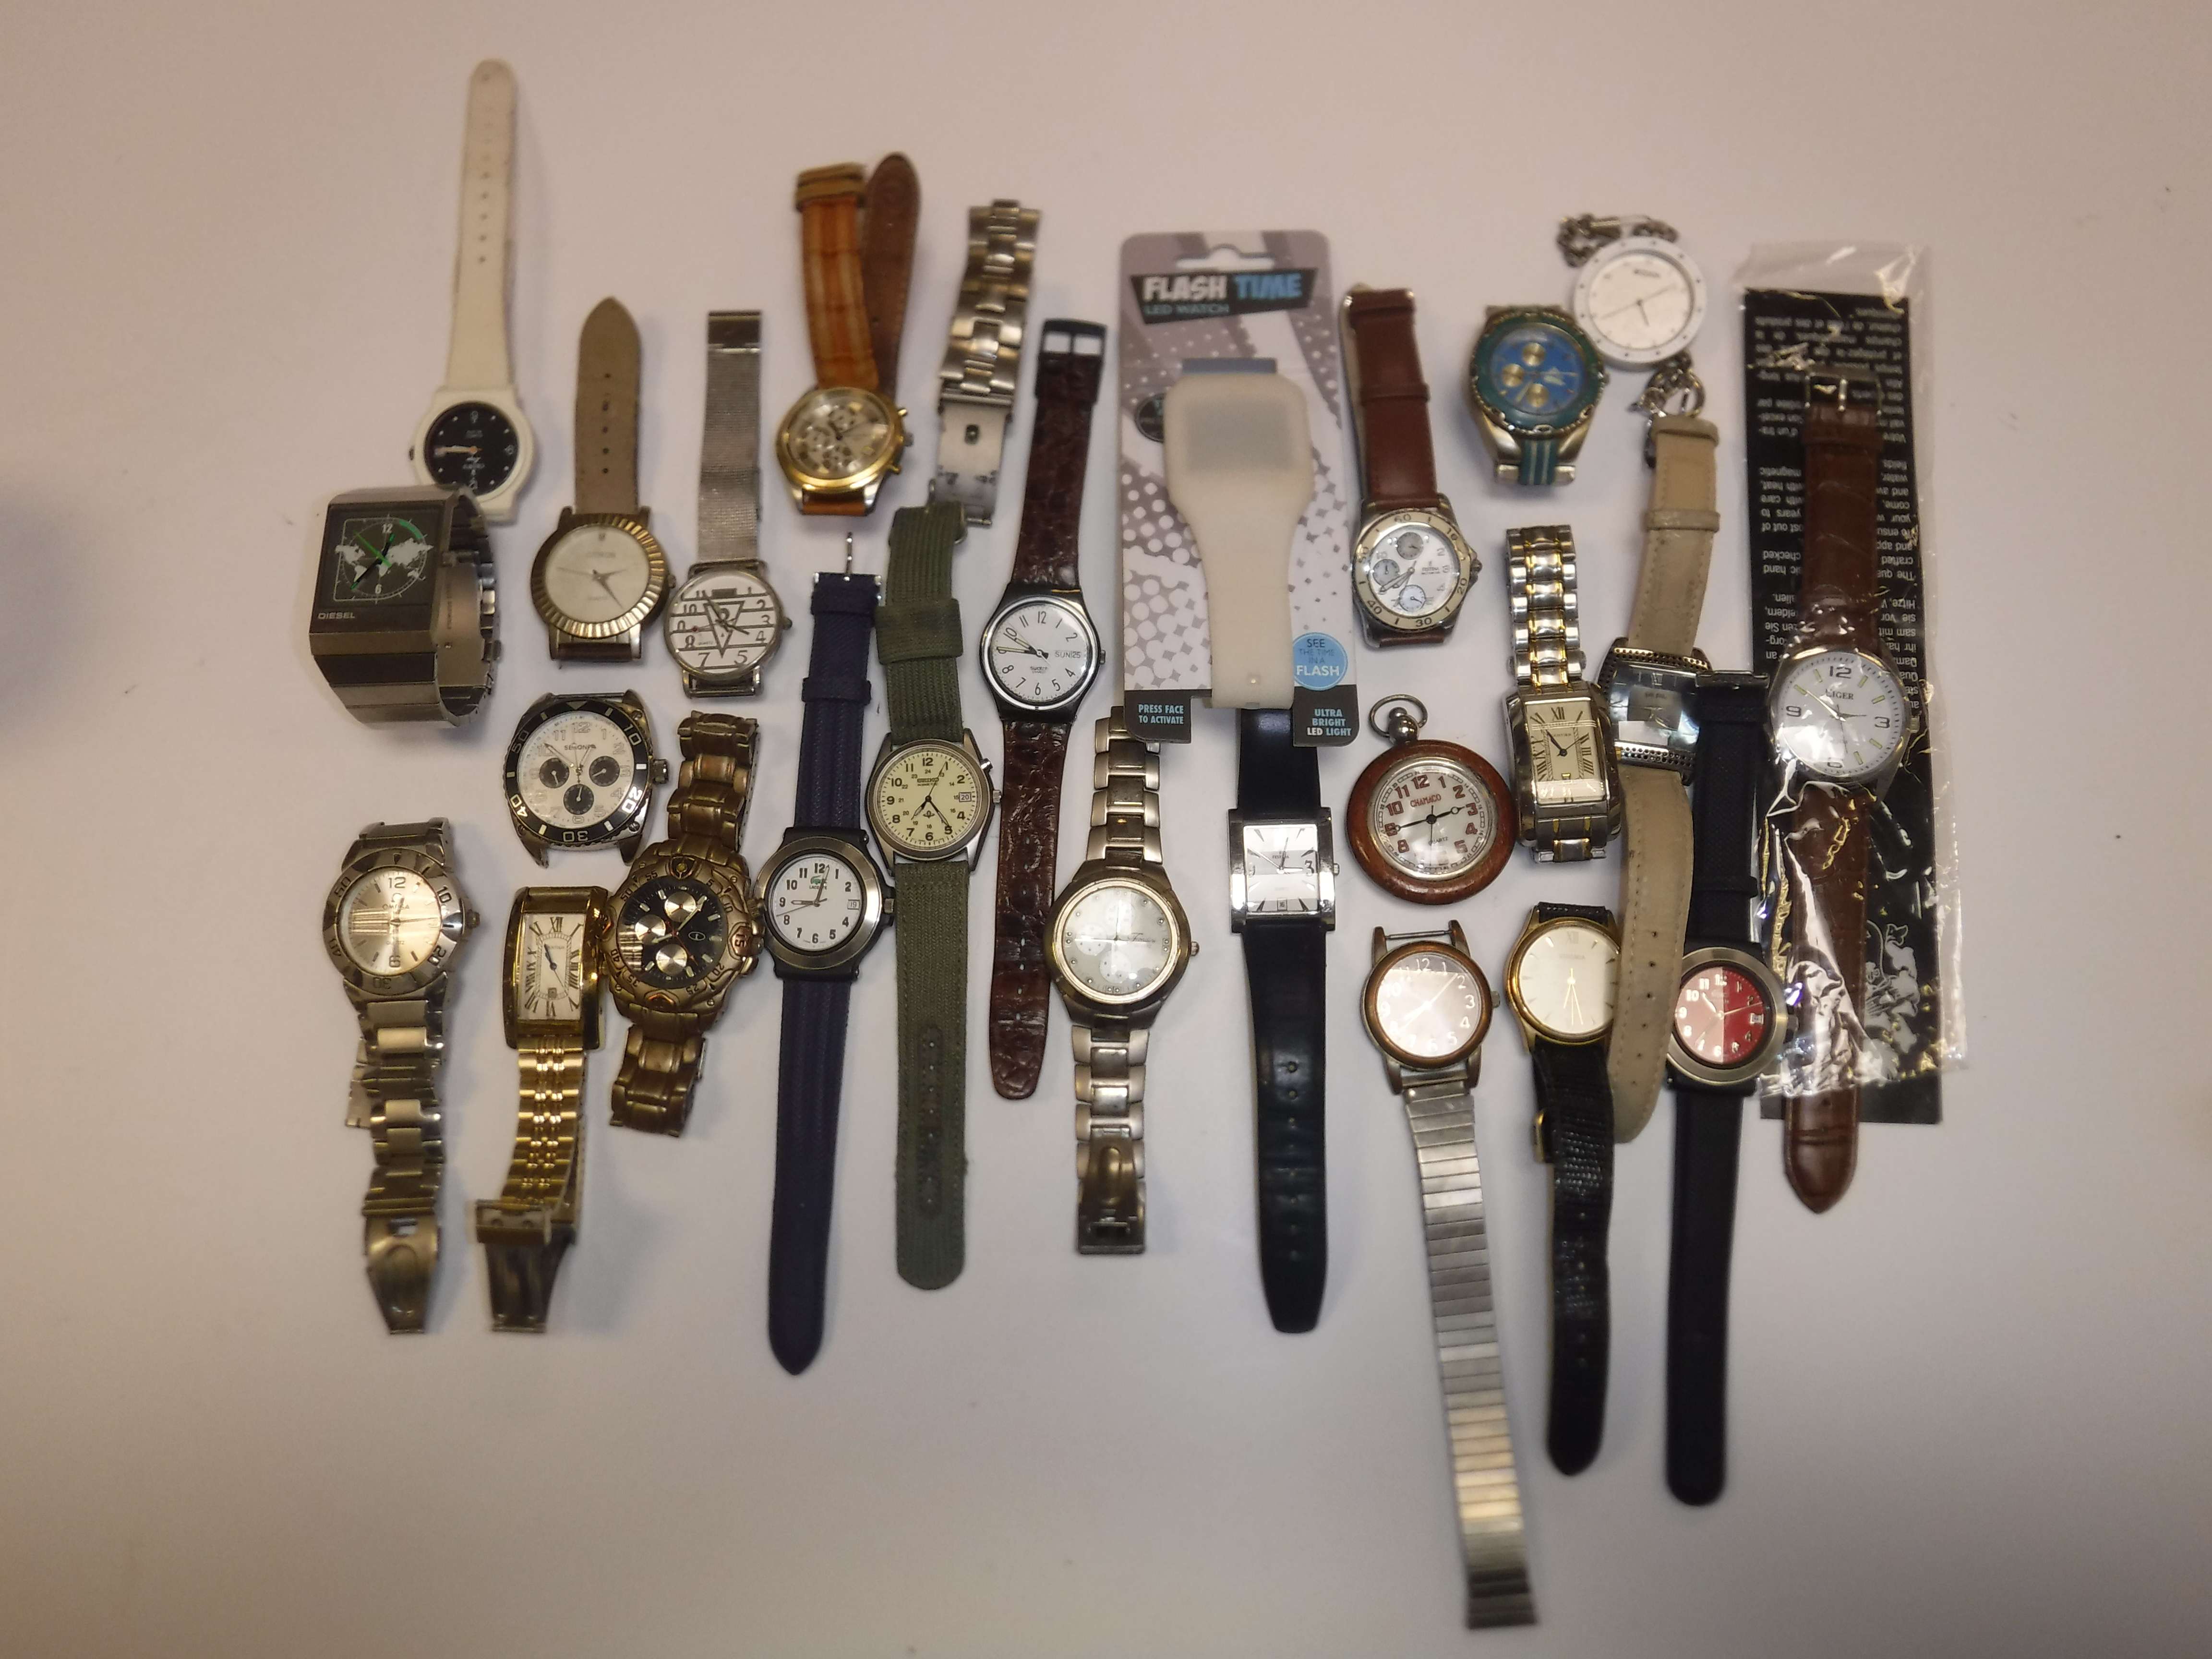 A bag containing 24 various watches, including Swatch, Select, imitation Omega, Solo, Crown, - Image 2 of 6